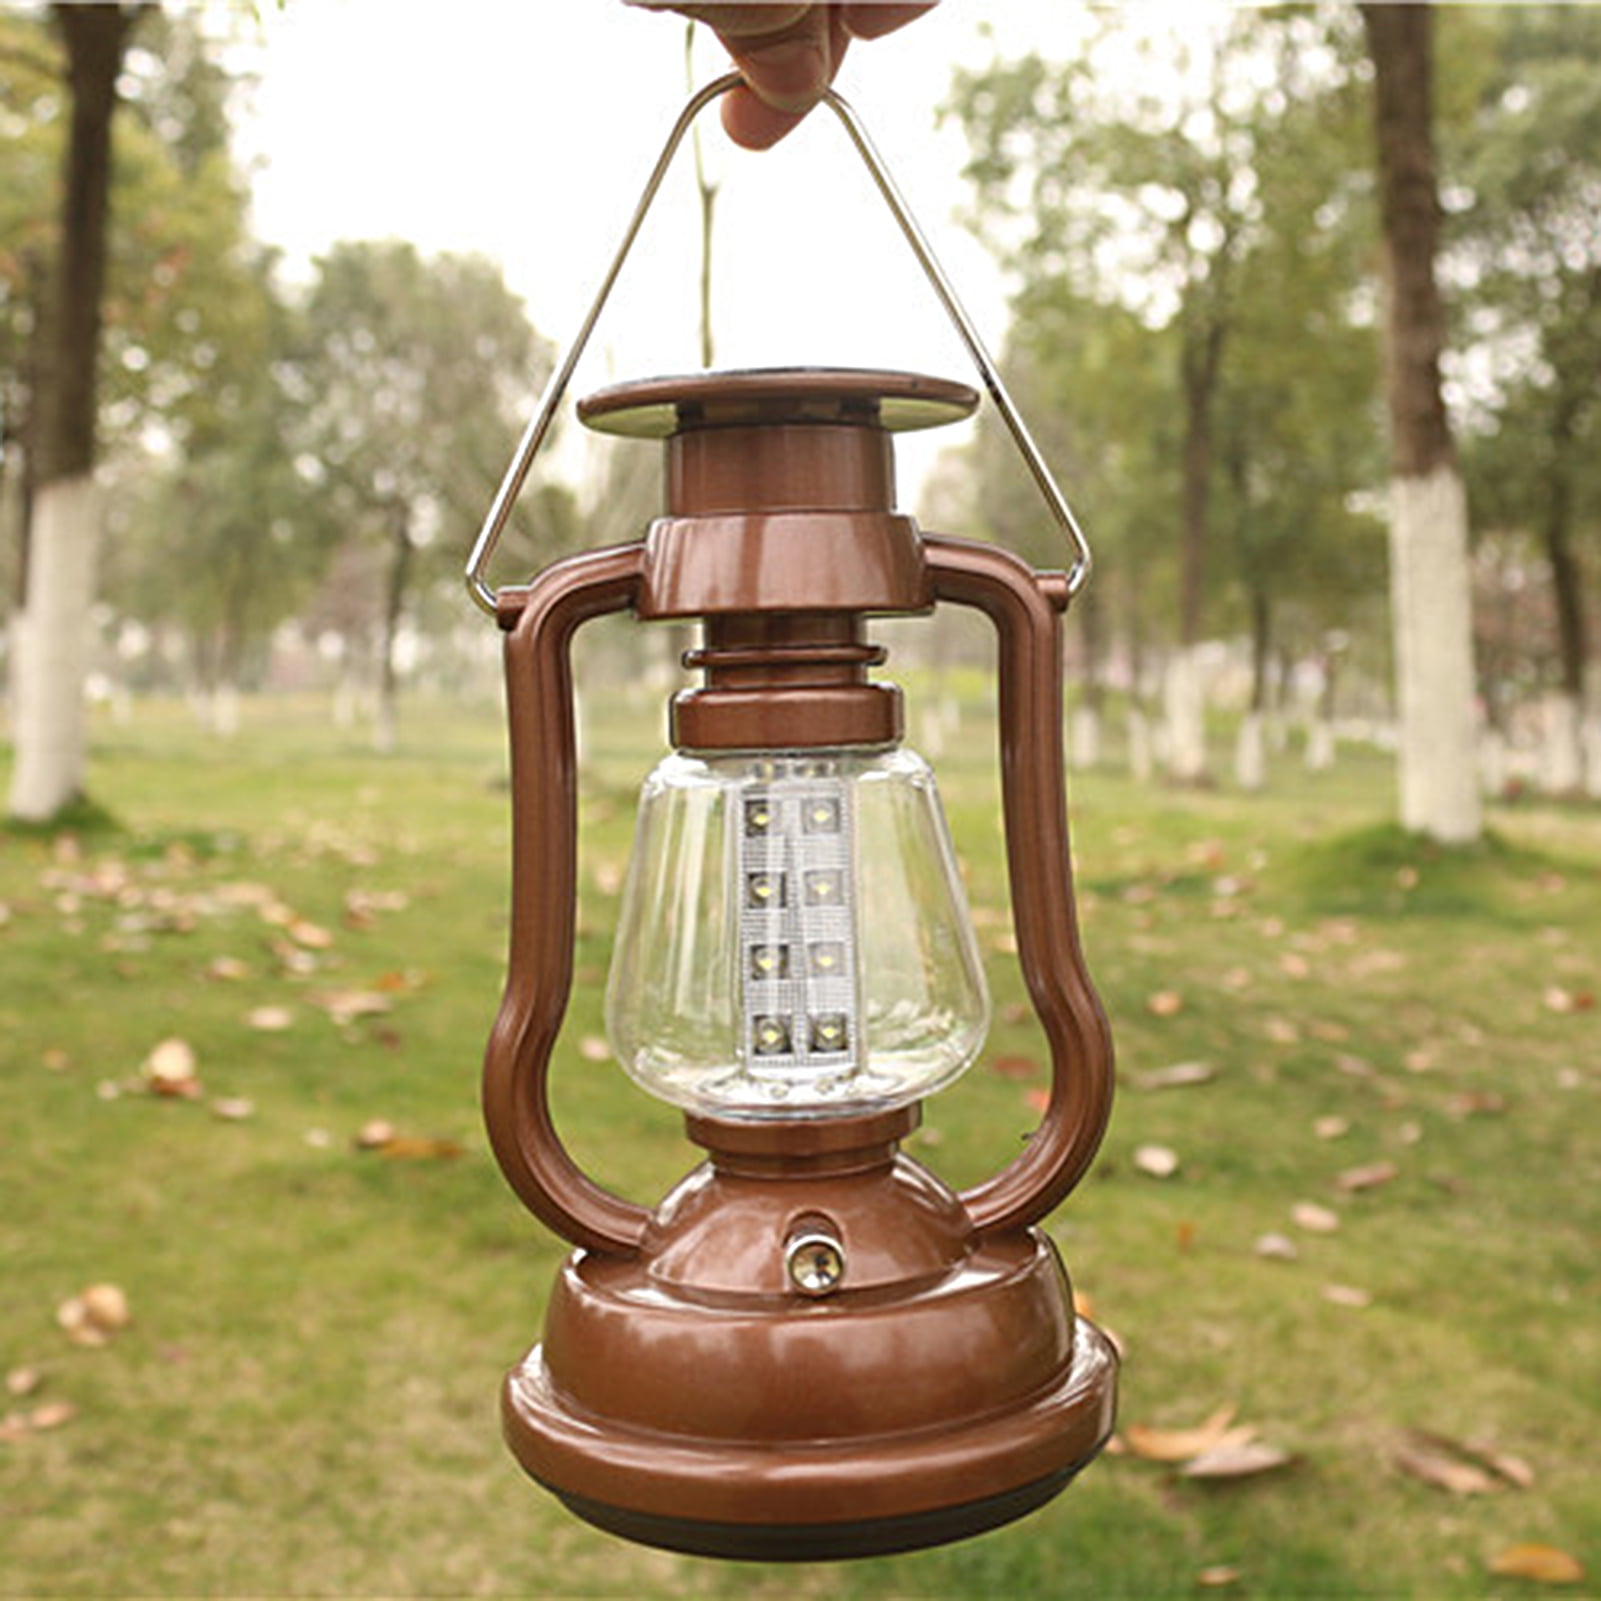 Goldmore5 LED Camping Lantern Rechargeable Retro Metal Camping Light  Battery Powered Hanging Hand Crank Candle Lamp - China Dry Outdoor Solar Camping  Light, Dry Battery Operatedlight